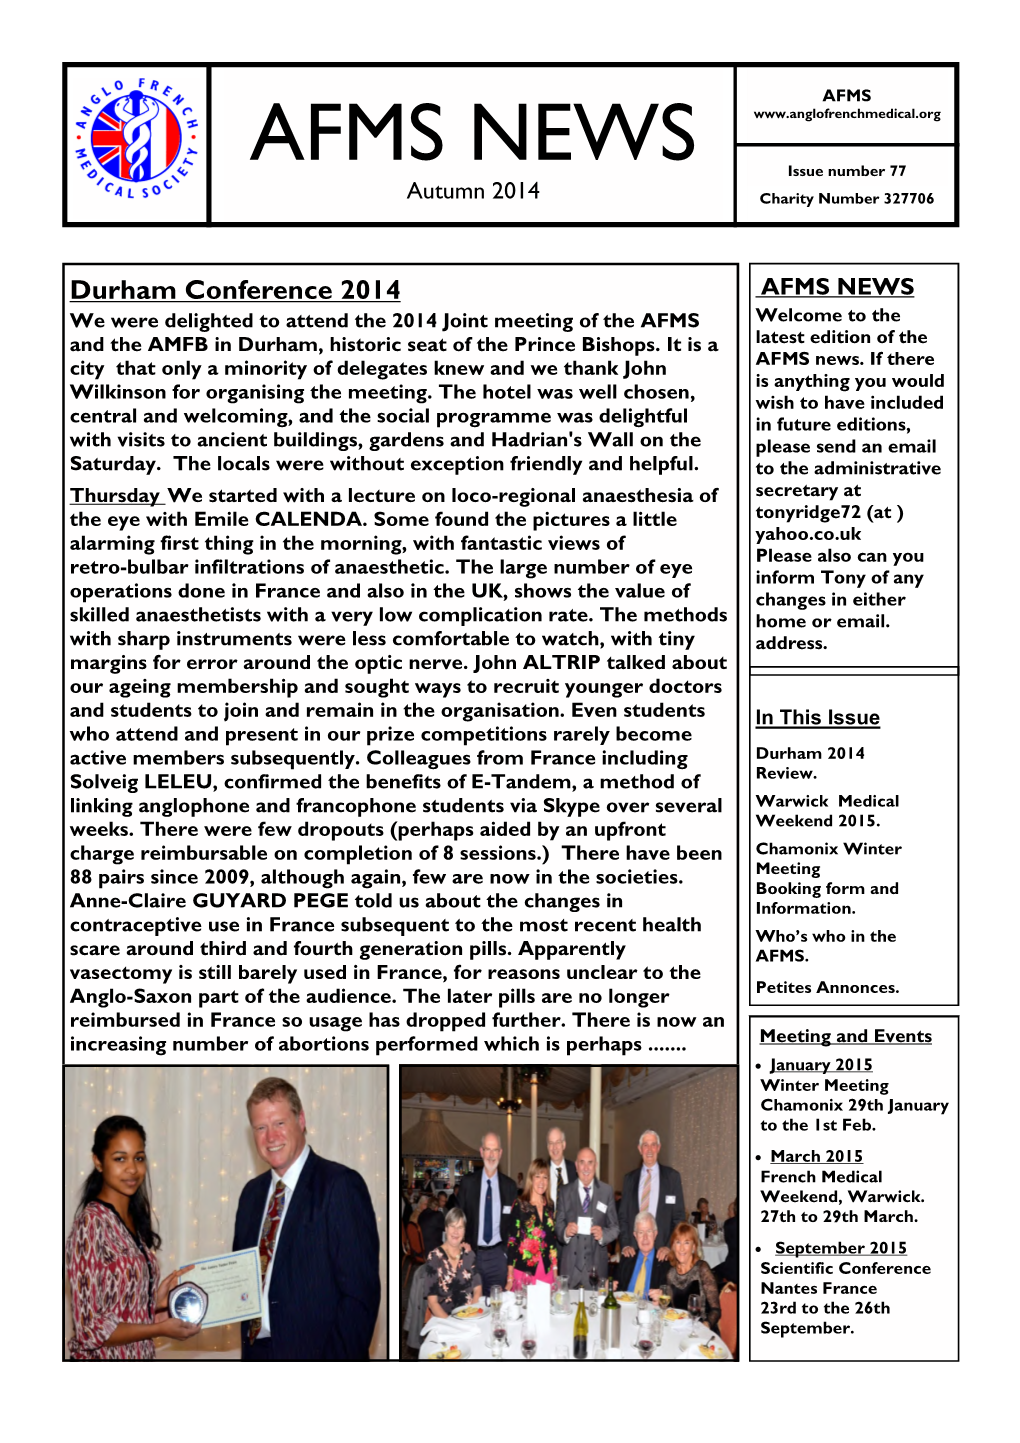 AFMS NEWS Issue Number 77 Autumn 2014 Charity Number 327706